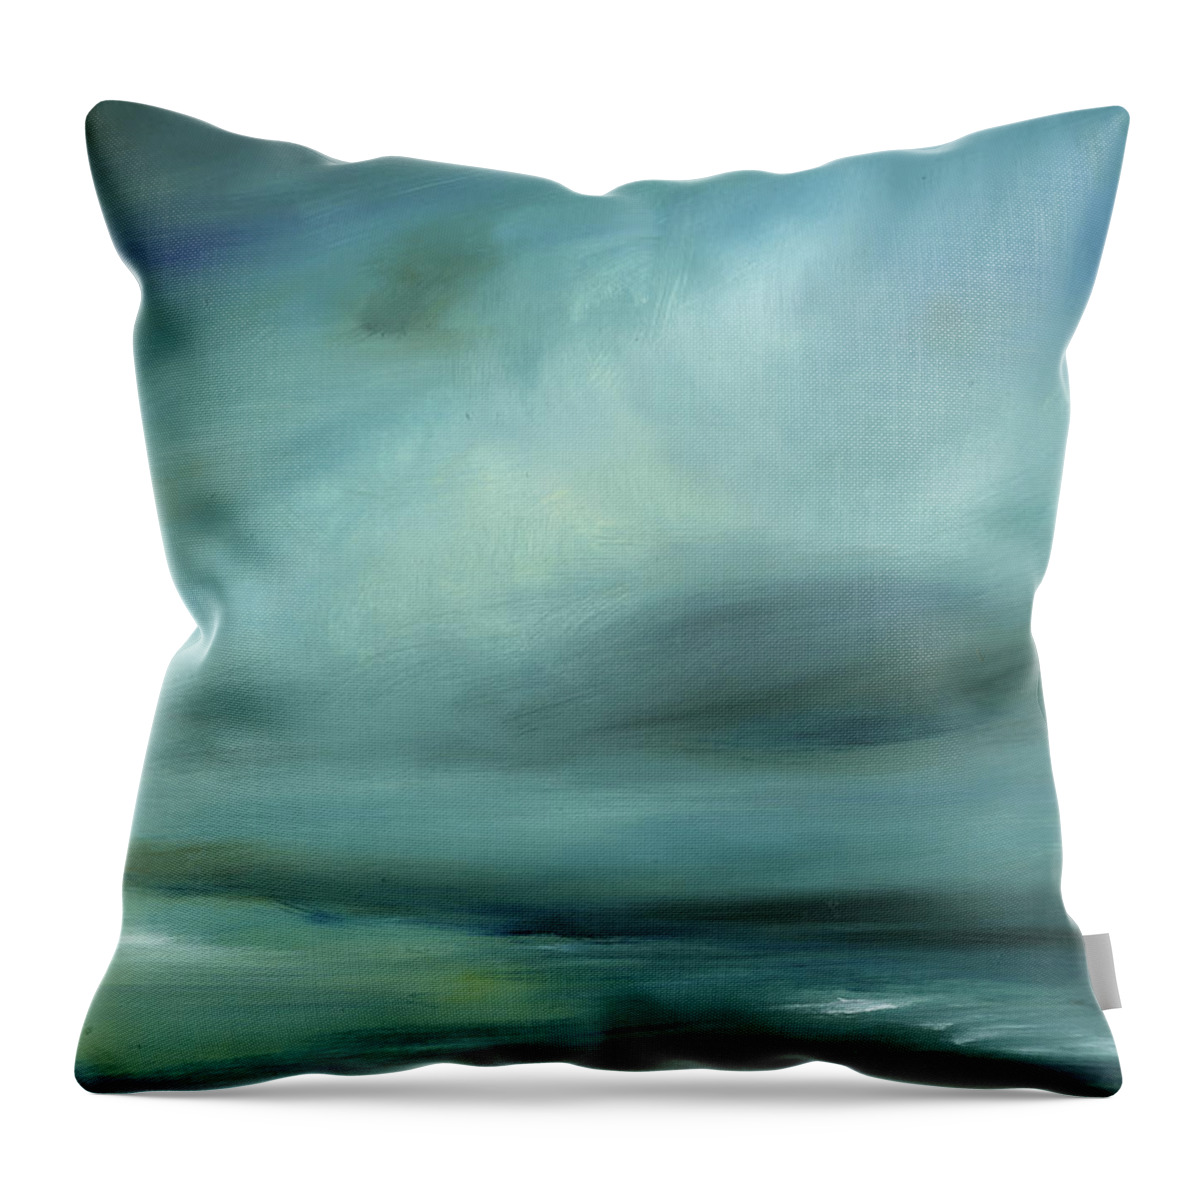 Abstract Art Throw Pillow featuring the painting Calima by Juan Bosco